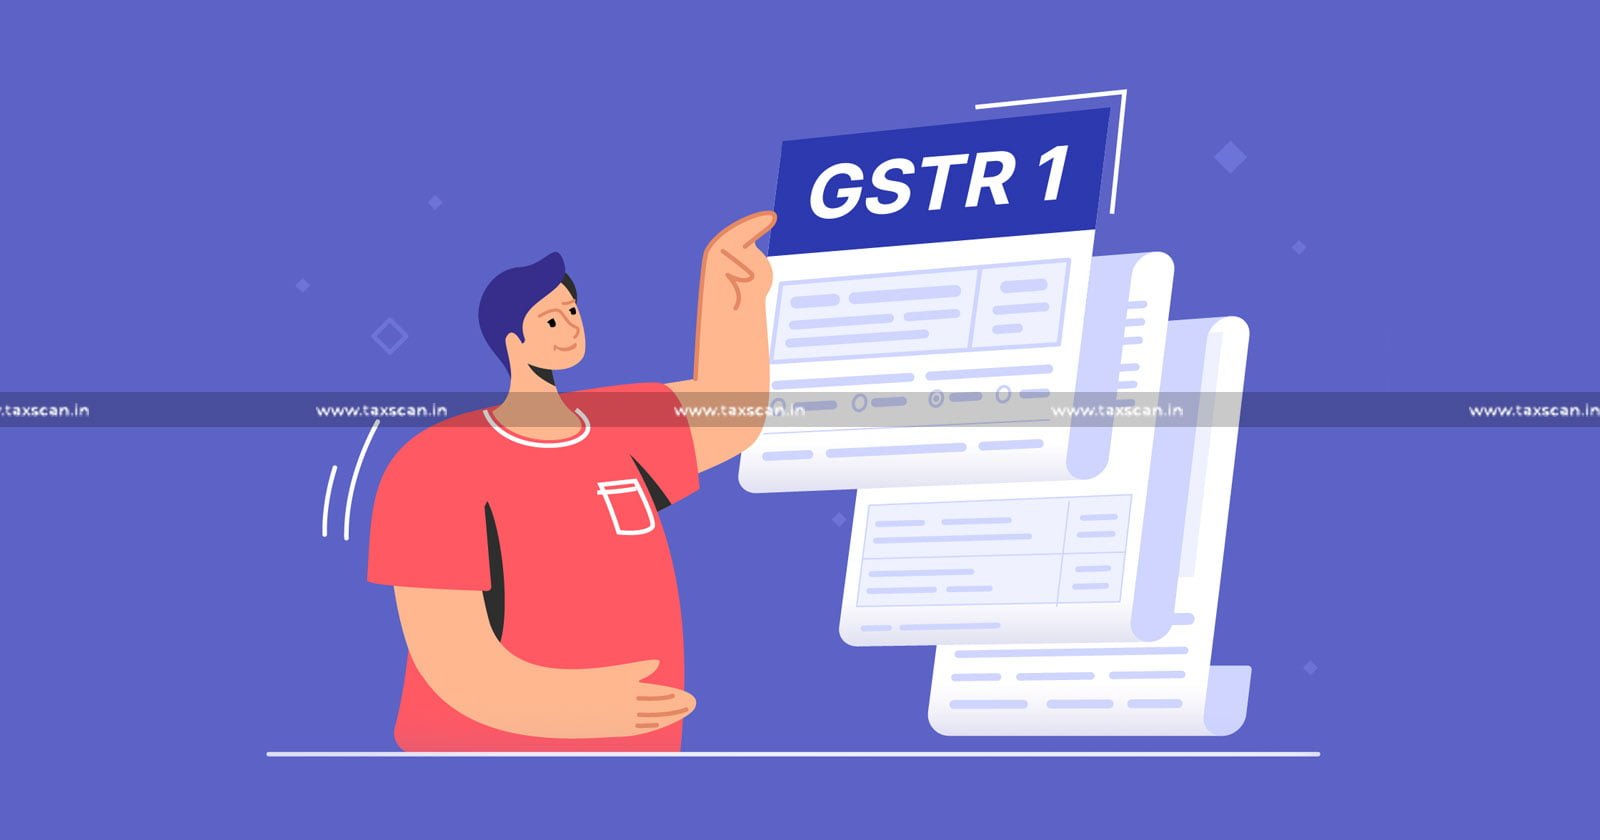 Rectification of Inadvertent Errors - Inadvertent Errors - Madras High Court - Form GSTR 1 - GSTR 1 - Proper Reporting of Turnover - taxscan